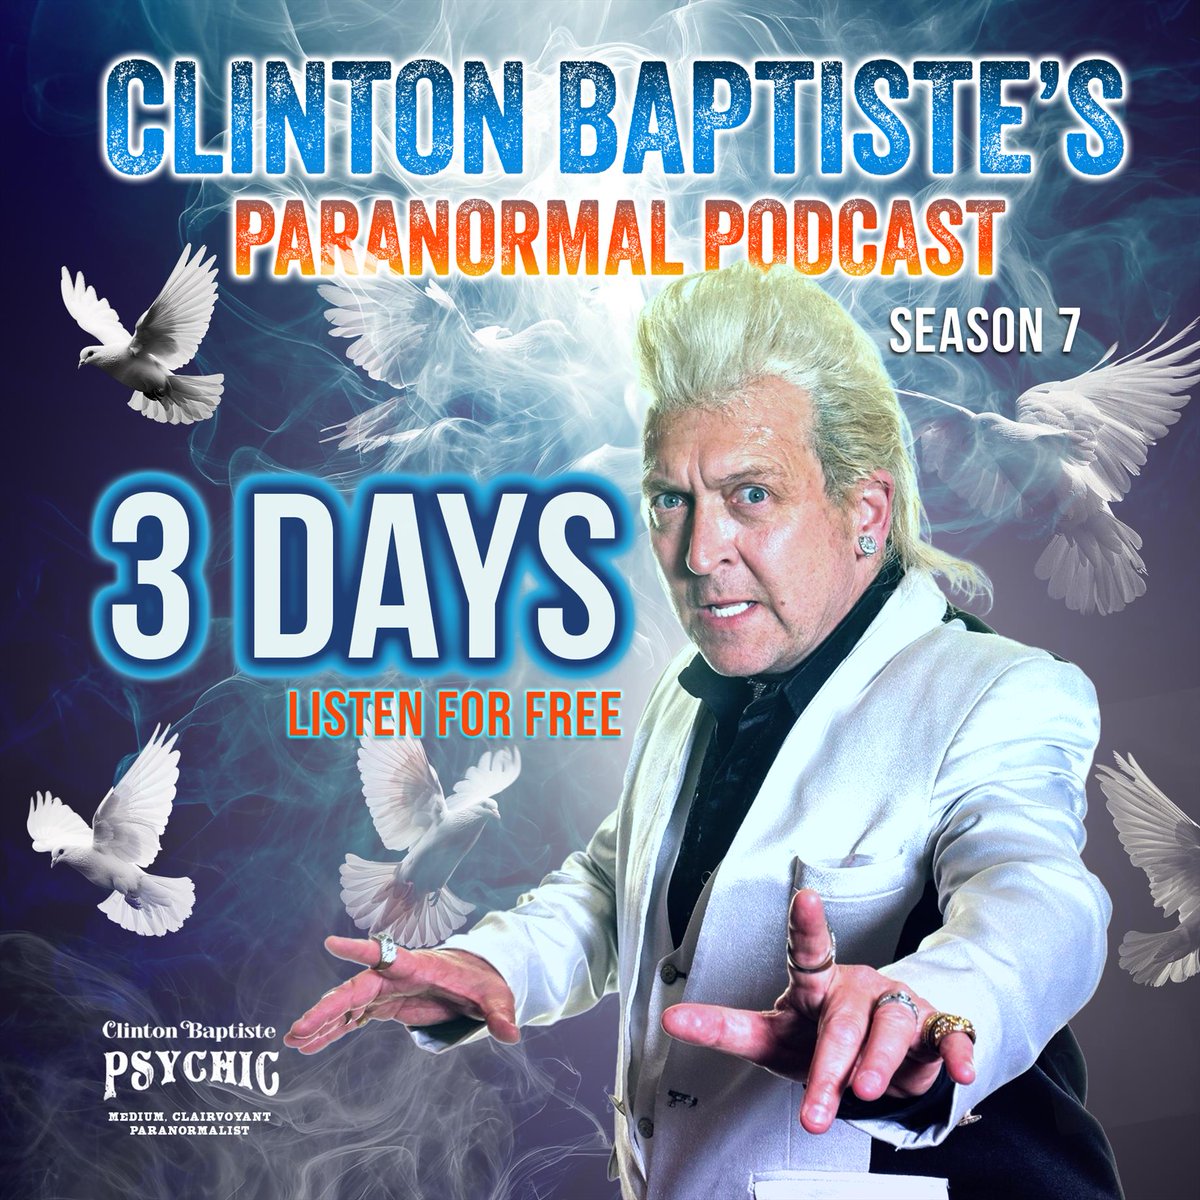 ✨ Season 7 is on the horizon! ✨ Get ready to embark on a journey through the supernatural with Clinton Baptiste. May the 3rd is fast approaching... Are you prepared? Listen for free at patreon.com/clintonbaptiste #3rdeye